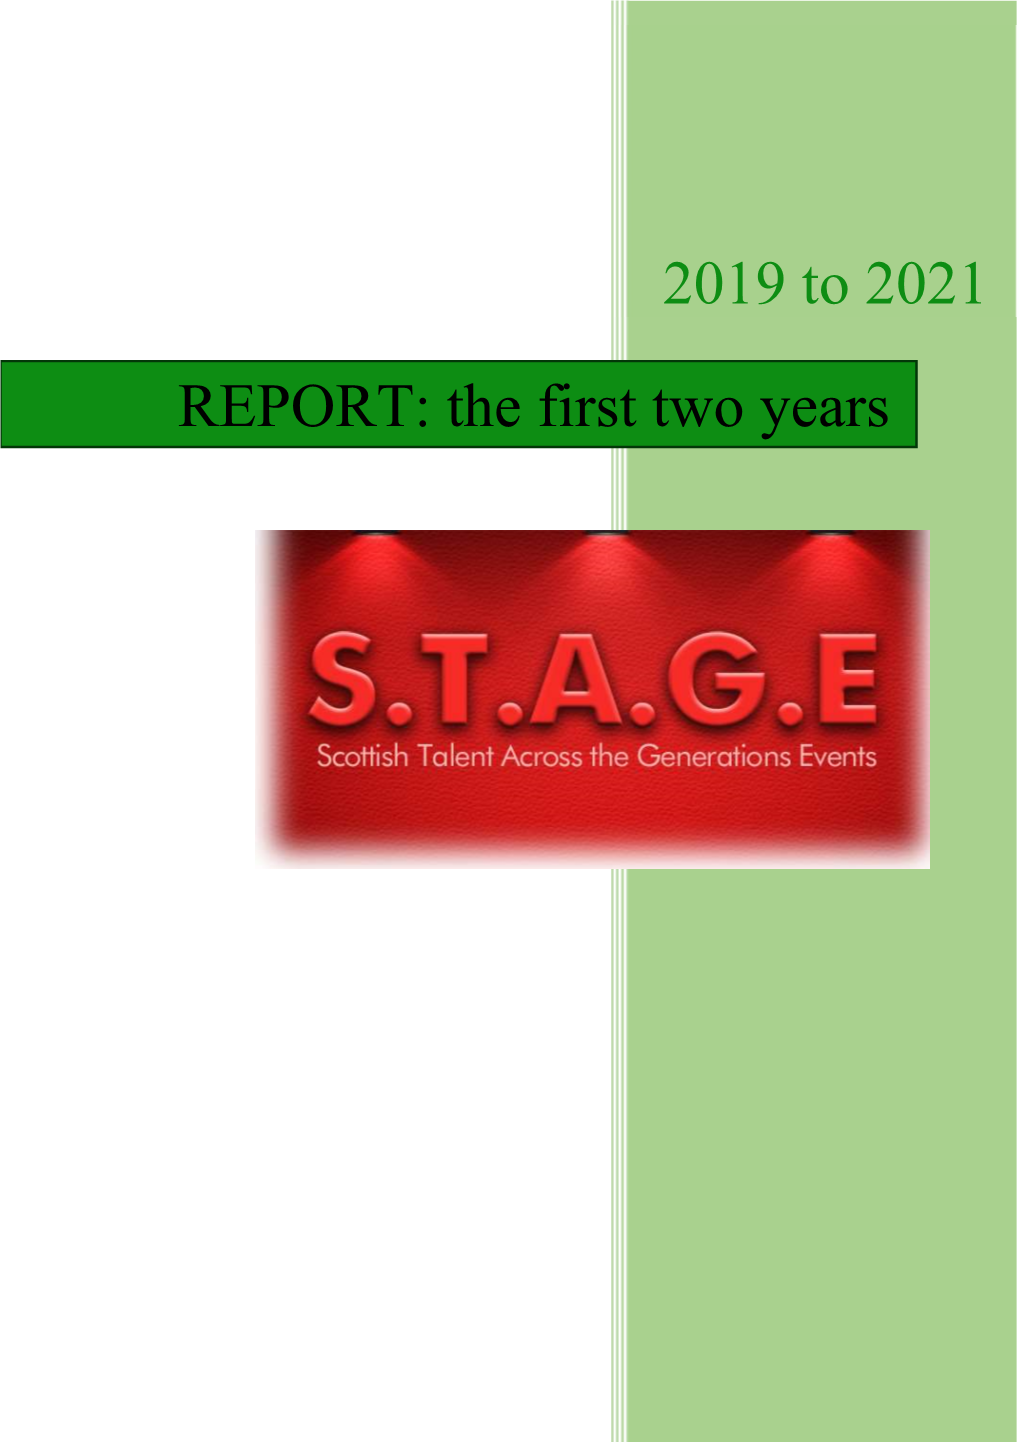 REPORT: the First Two Years